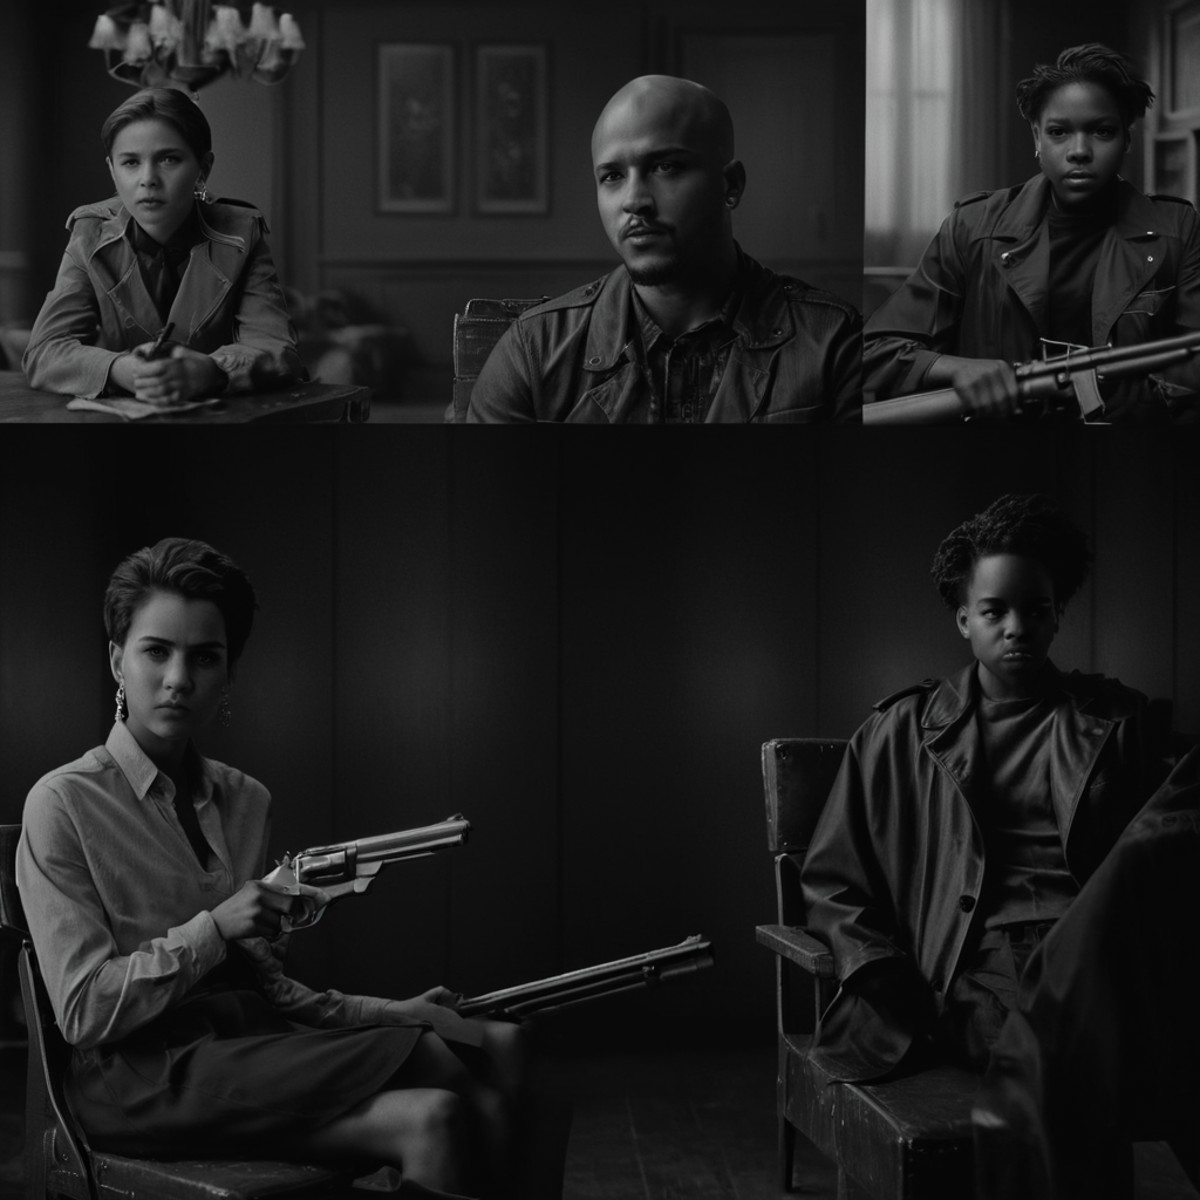 cinematic film still of  <lora:Split Screen Style:1>
three different images of a woman sitting on a chair next to a man,Sp...